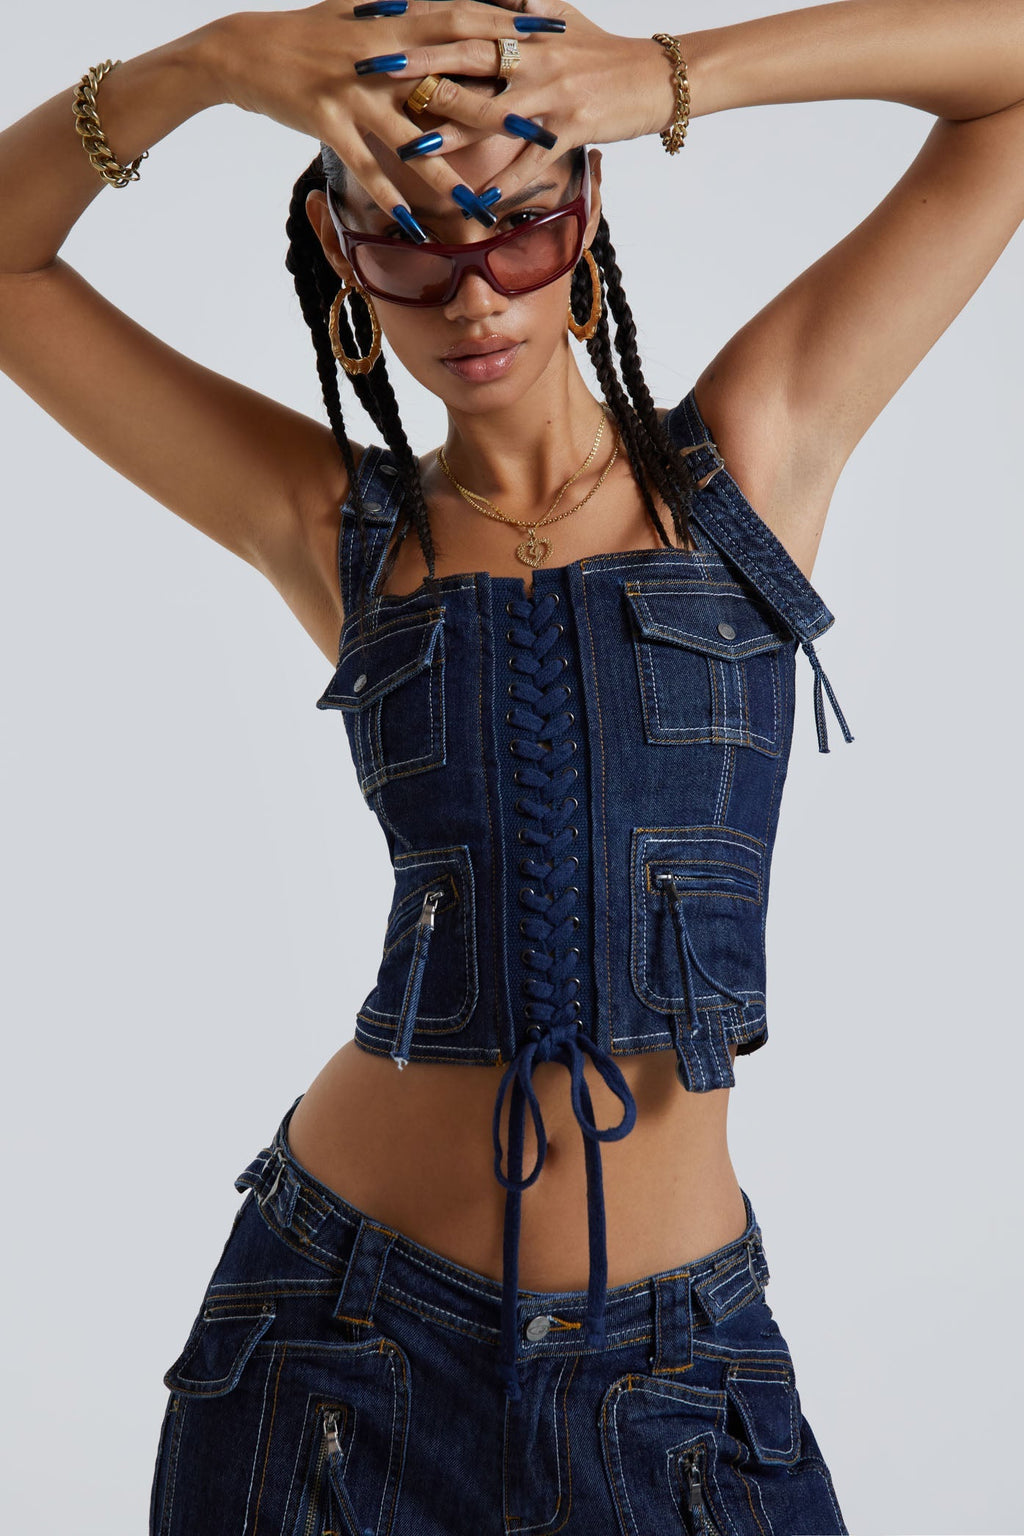 Blue Denim Corset Top With Crown Girdle Elegant And Slimming Waist